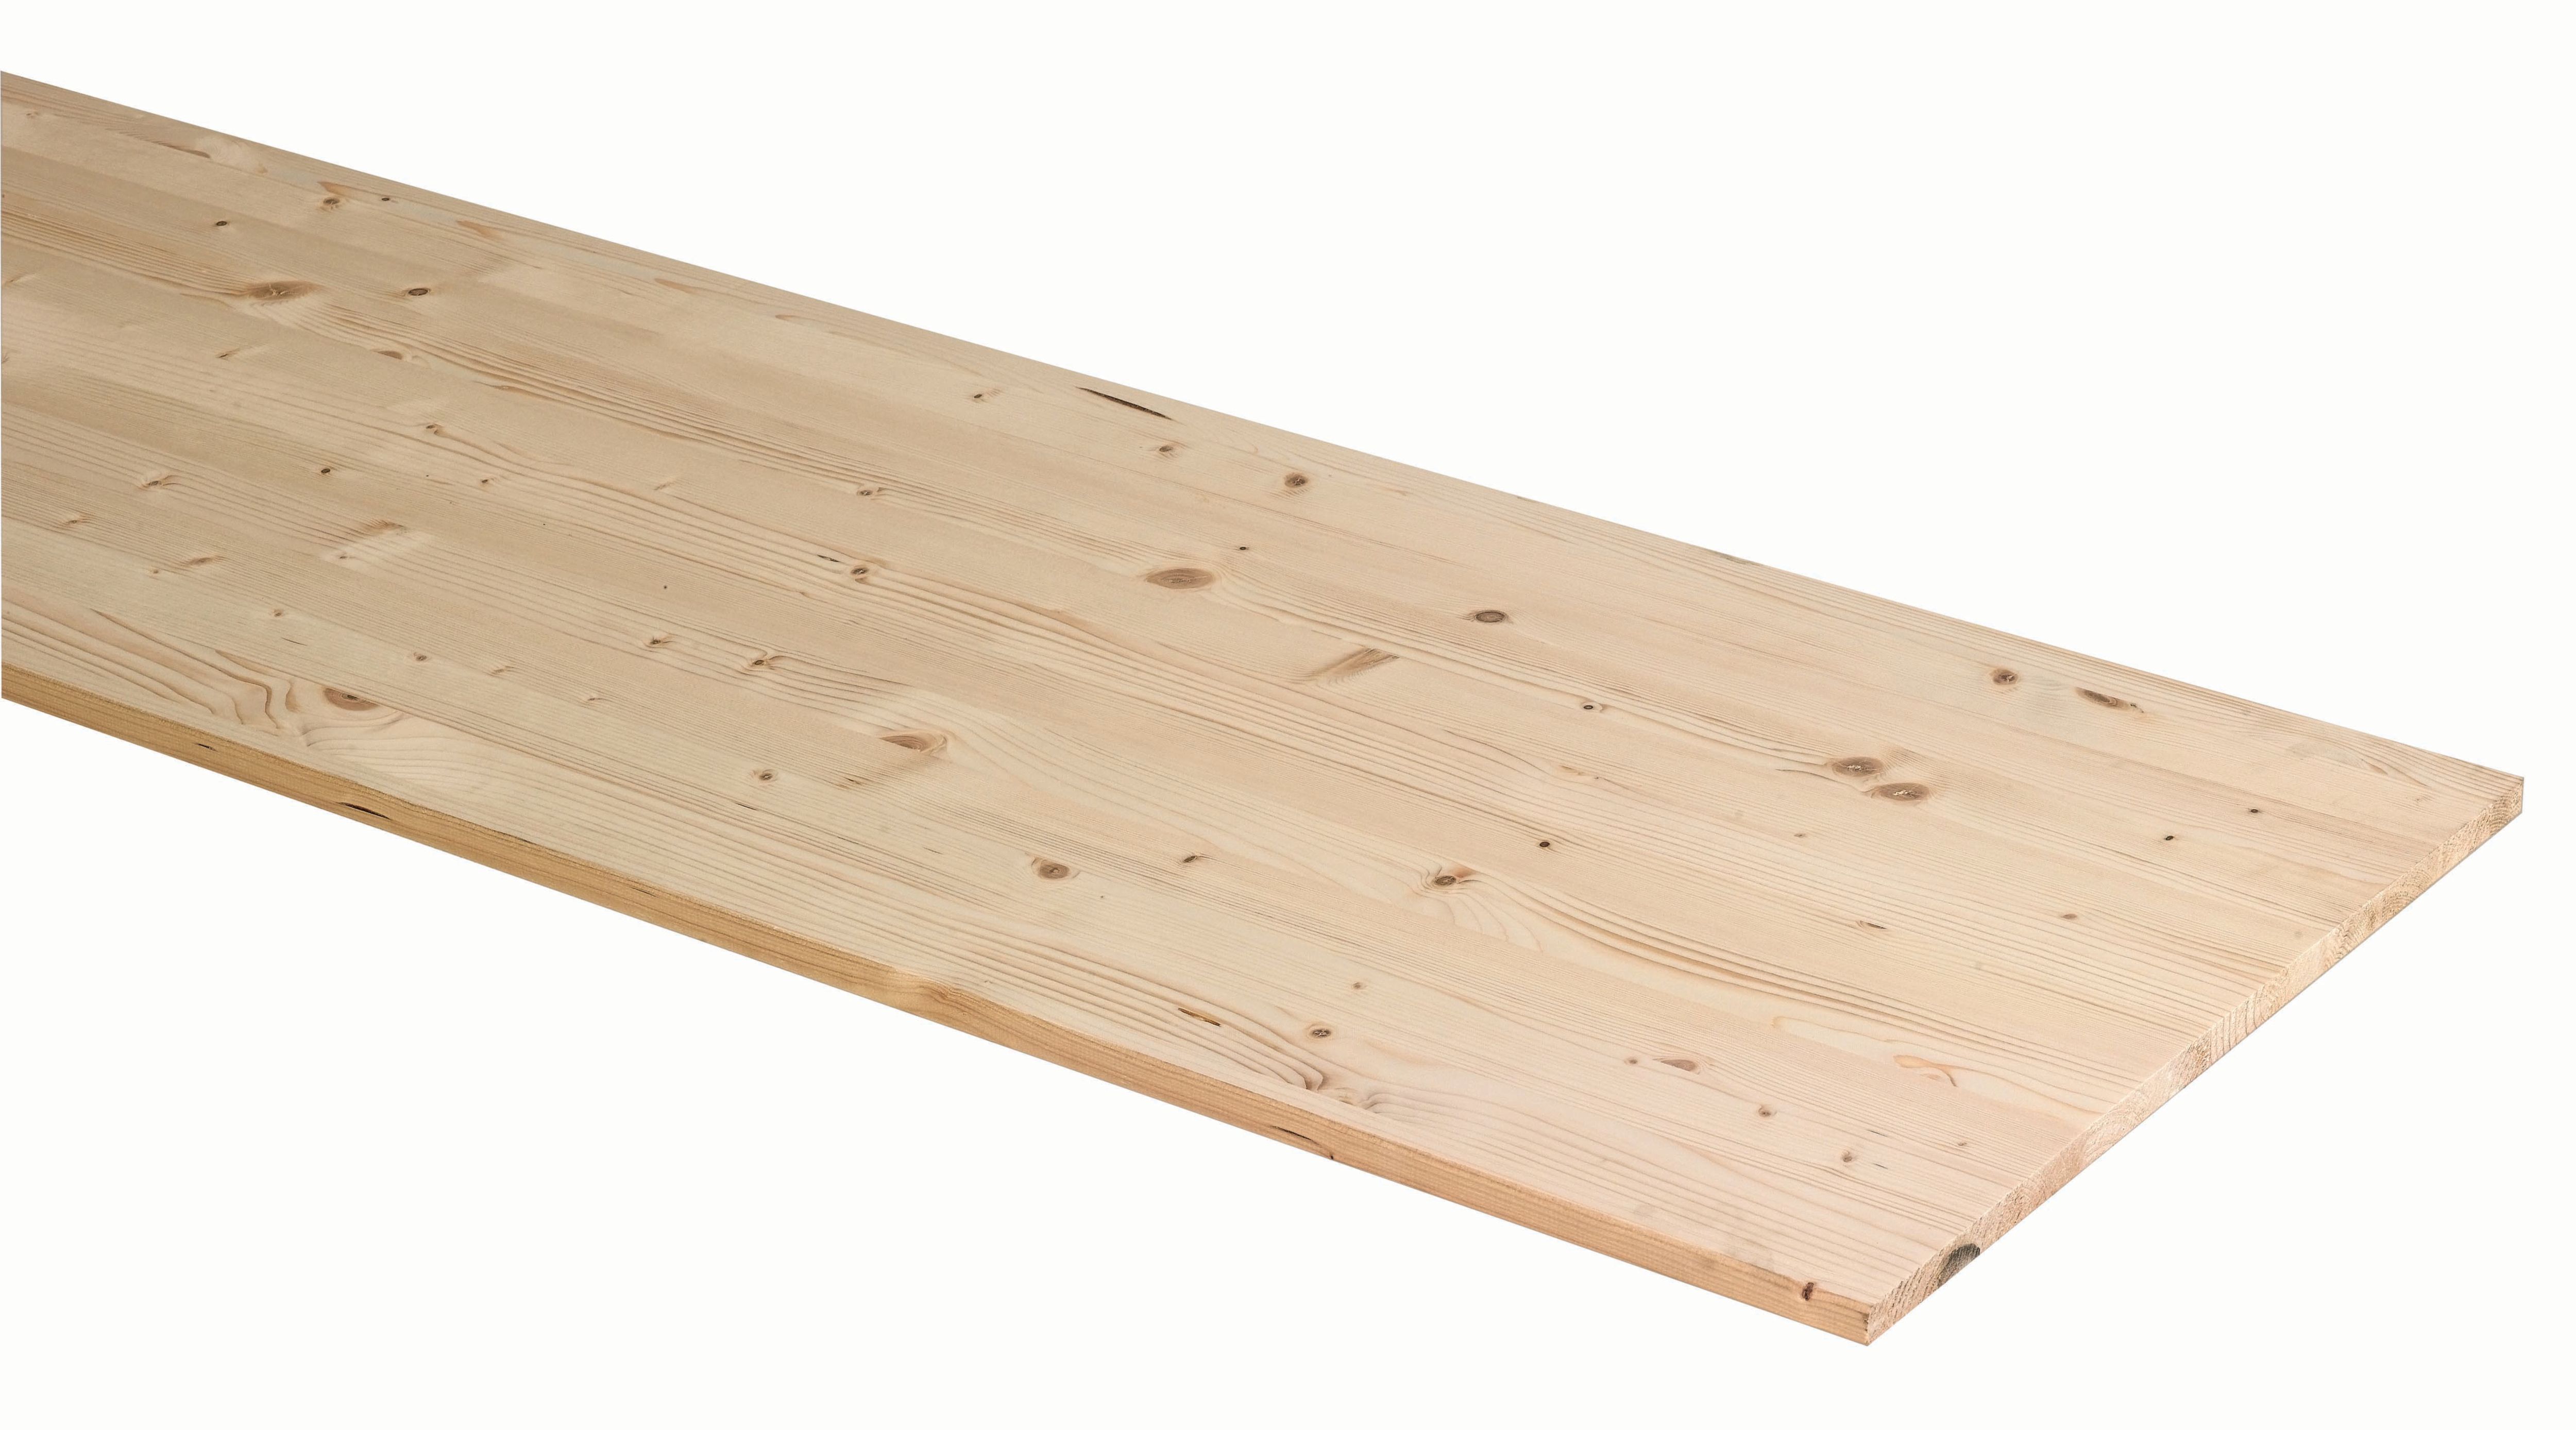 Image of Wickes General Purpose Spruce Timberboard - 18mm x 600mm x 2350mm